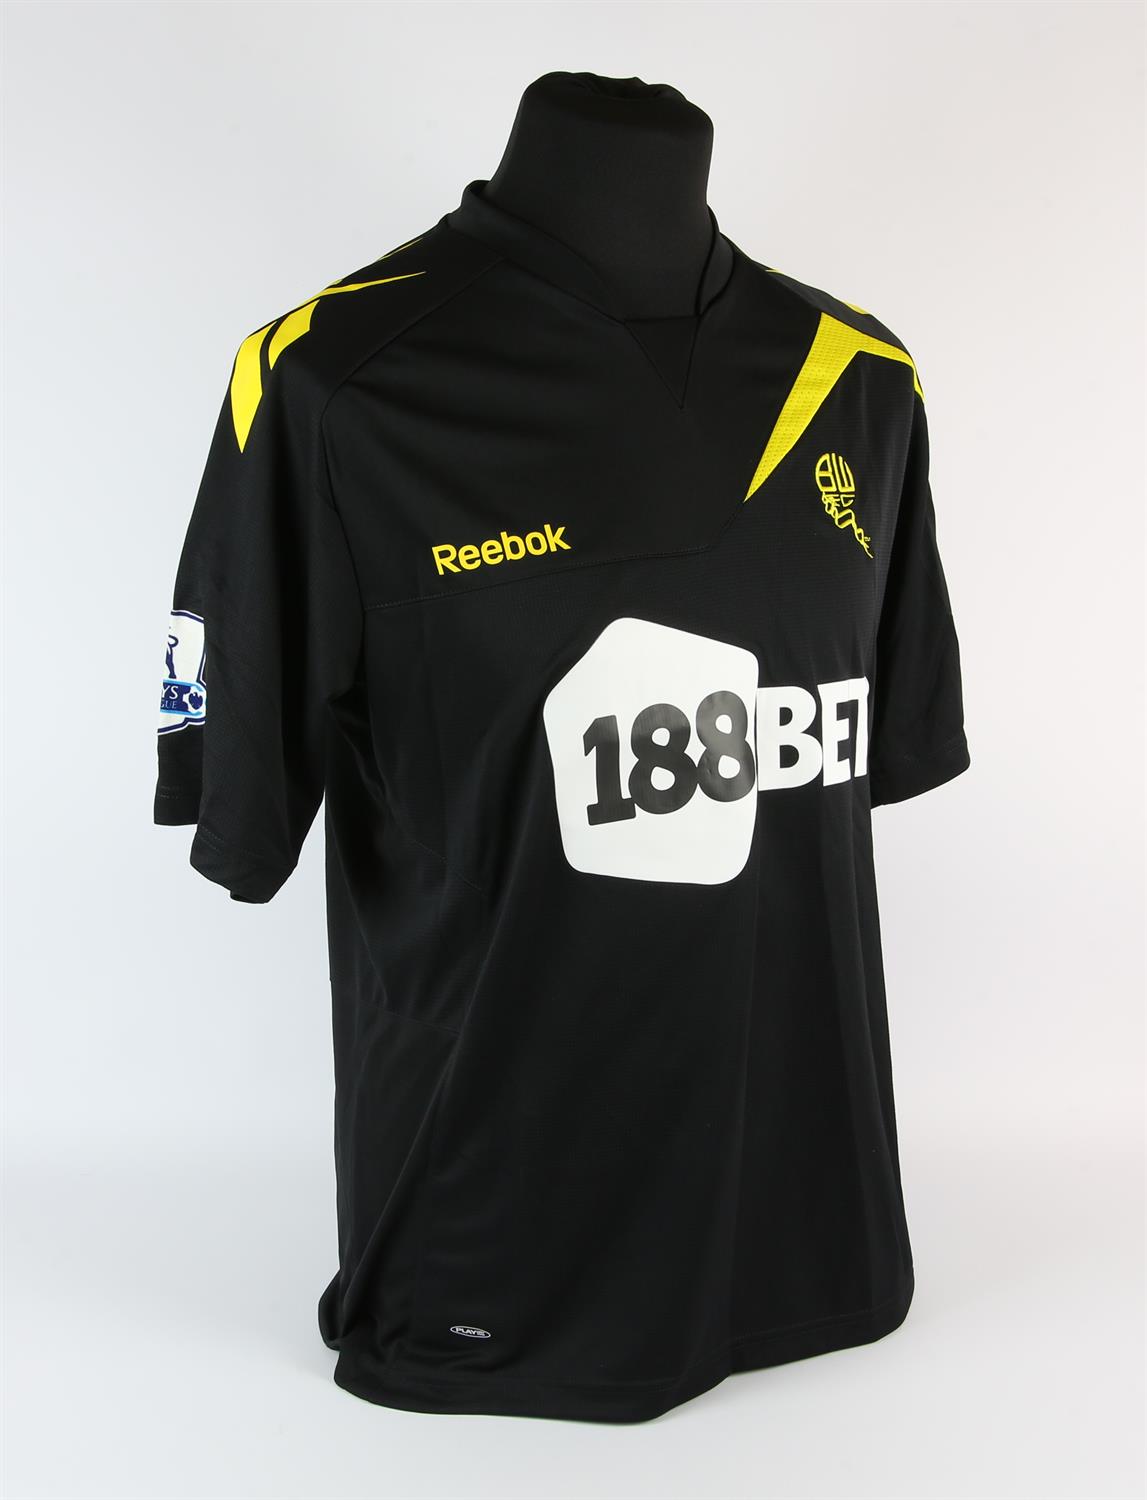 Bolton Wanderers Football club, N'Gog (No.24) Season shirt from 2011-2012, S/S. Match Worn 3 March - Image 2 of 2